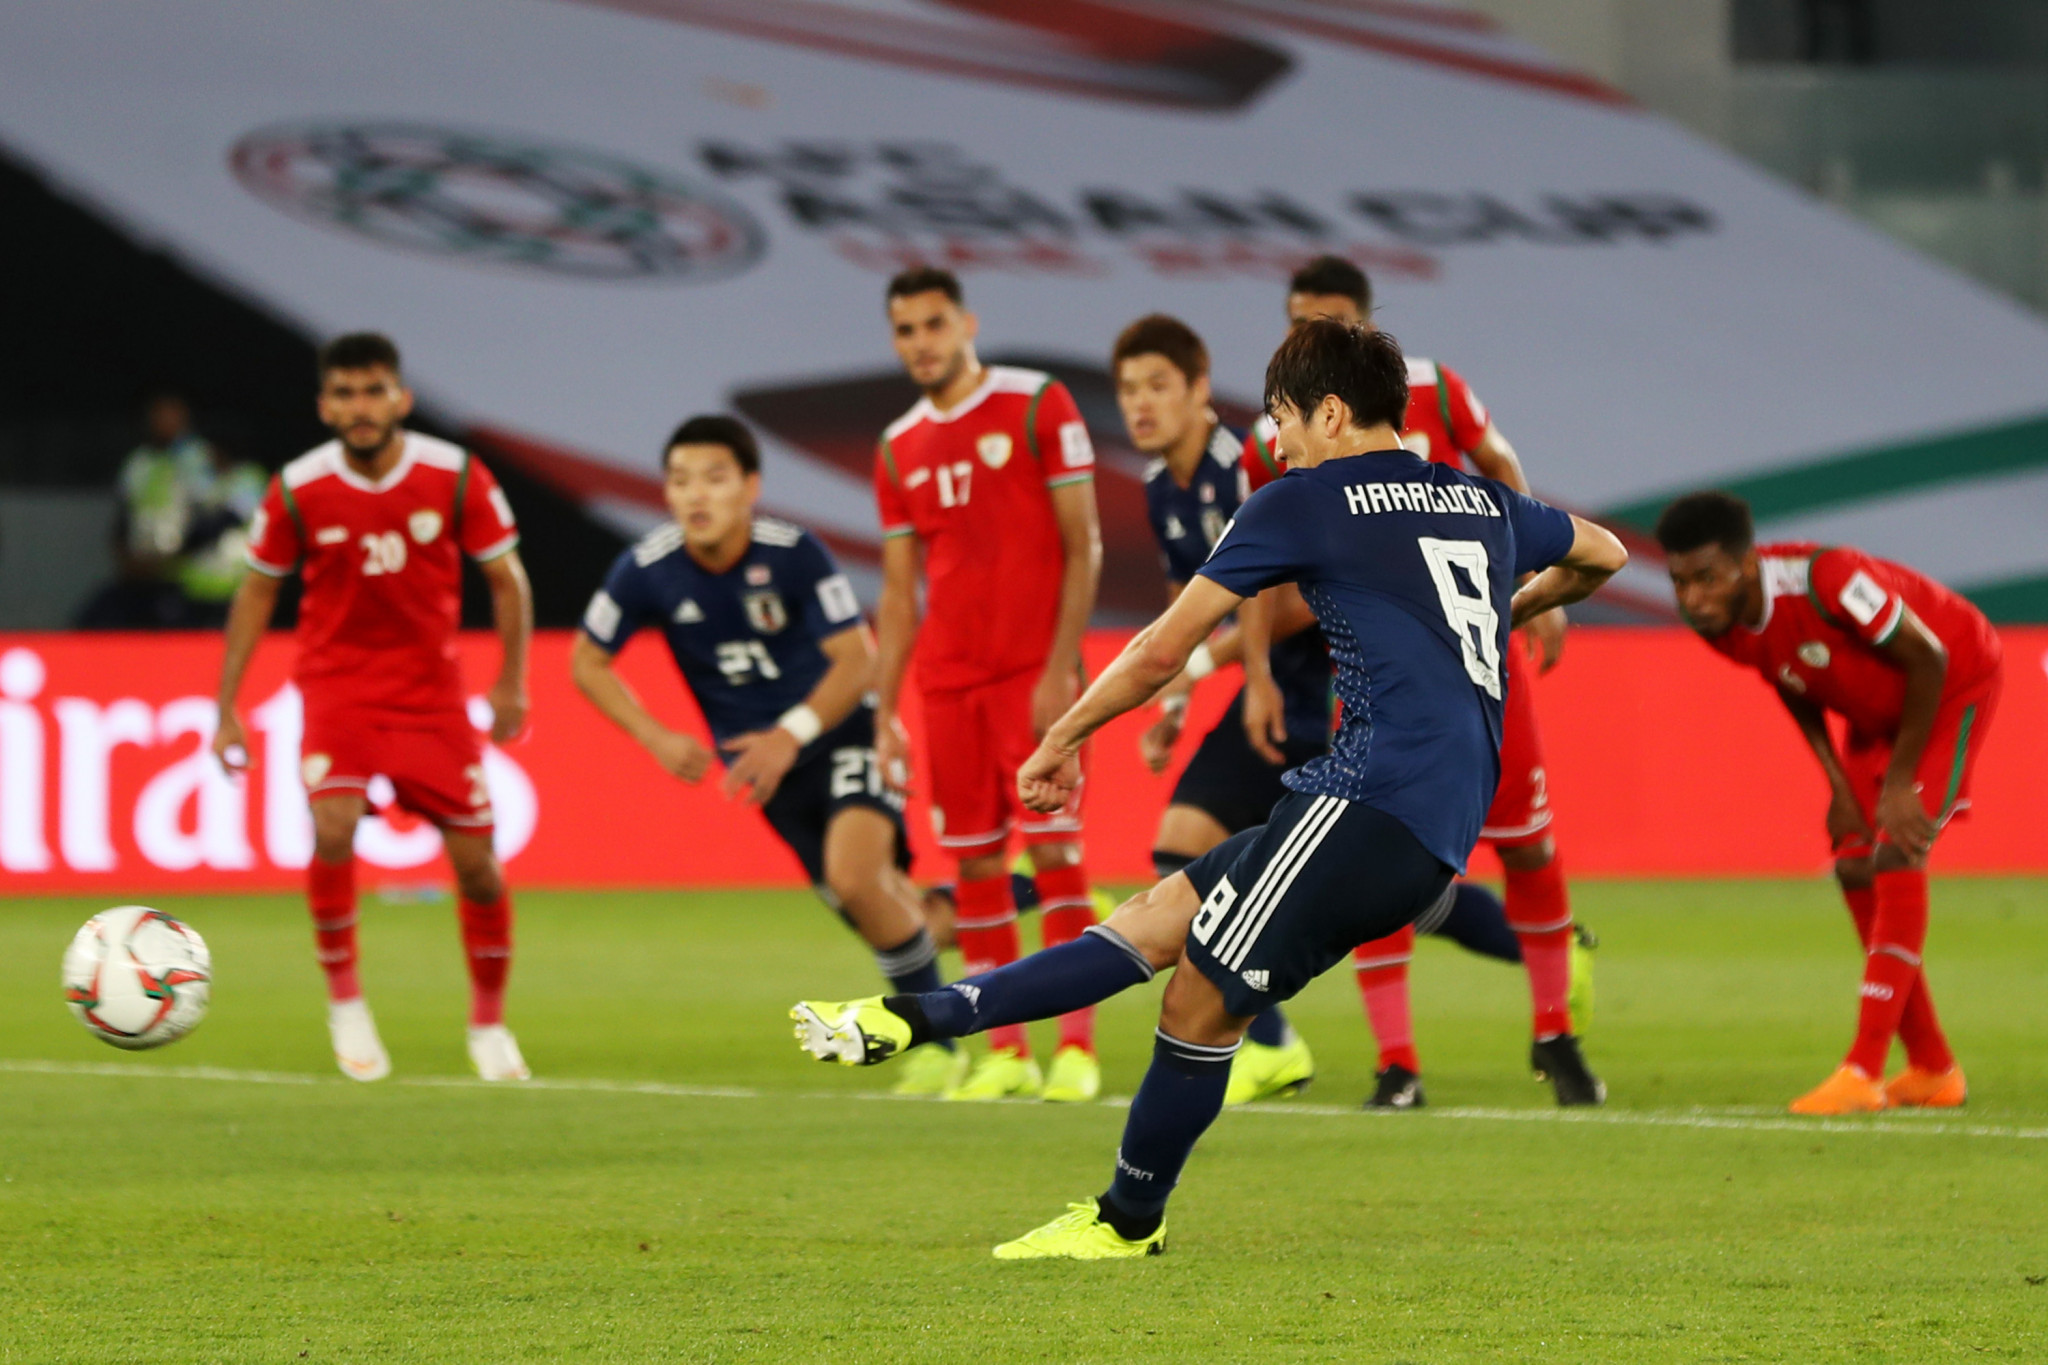 Genki Haraguchi scored a penalty for Japan in their 1-0 victory over Oman, although replays suggest the referee's decision to give the spot kick may have been wrong ©Getty Images